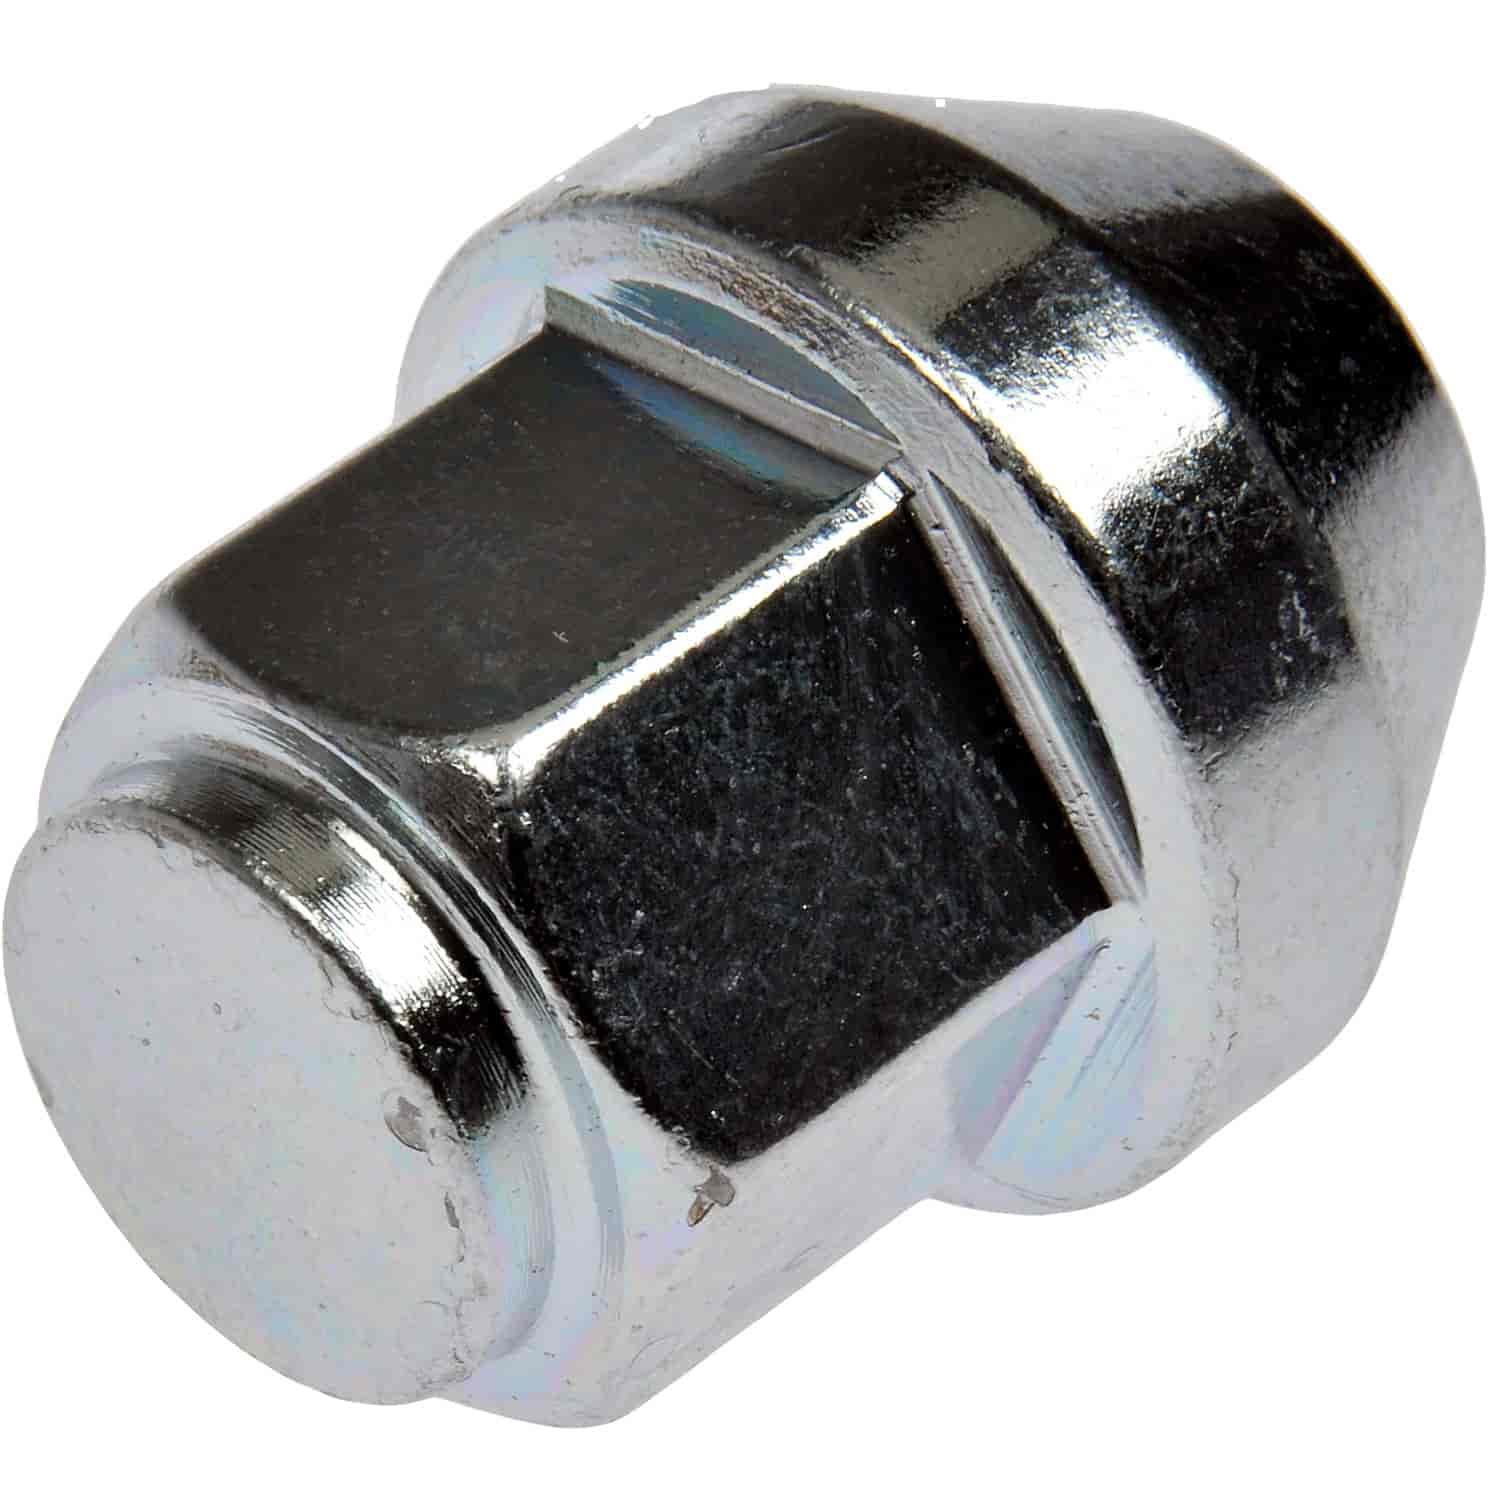 Wheel Nut M14-1.50 Dometop Capped - 21mm Hex 36.8mm Length